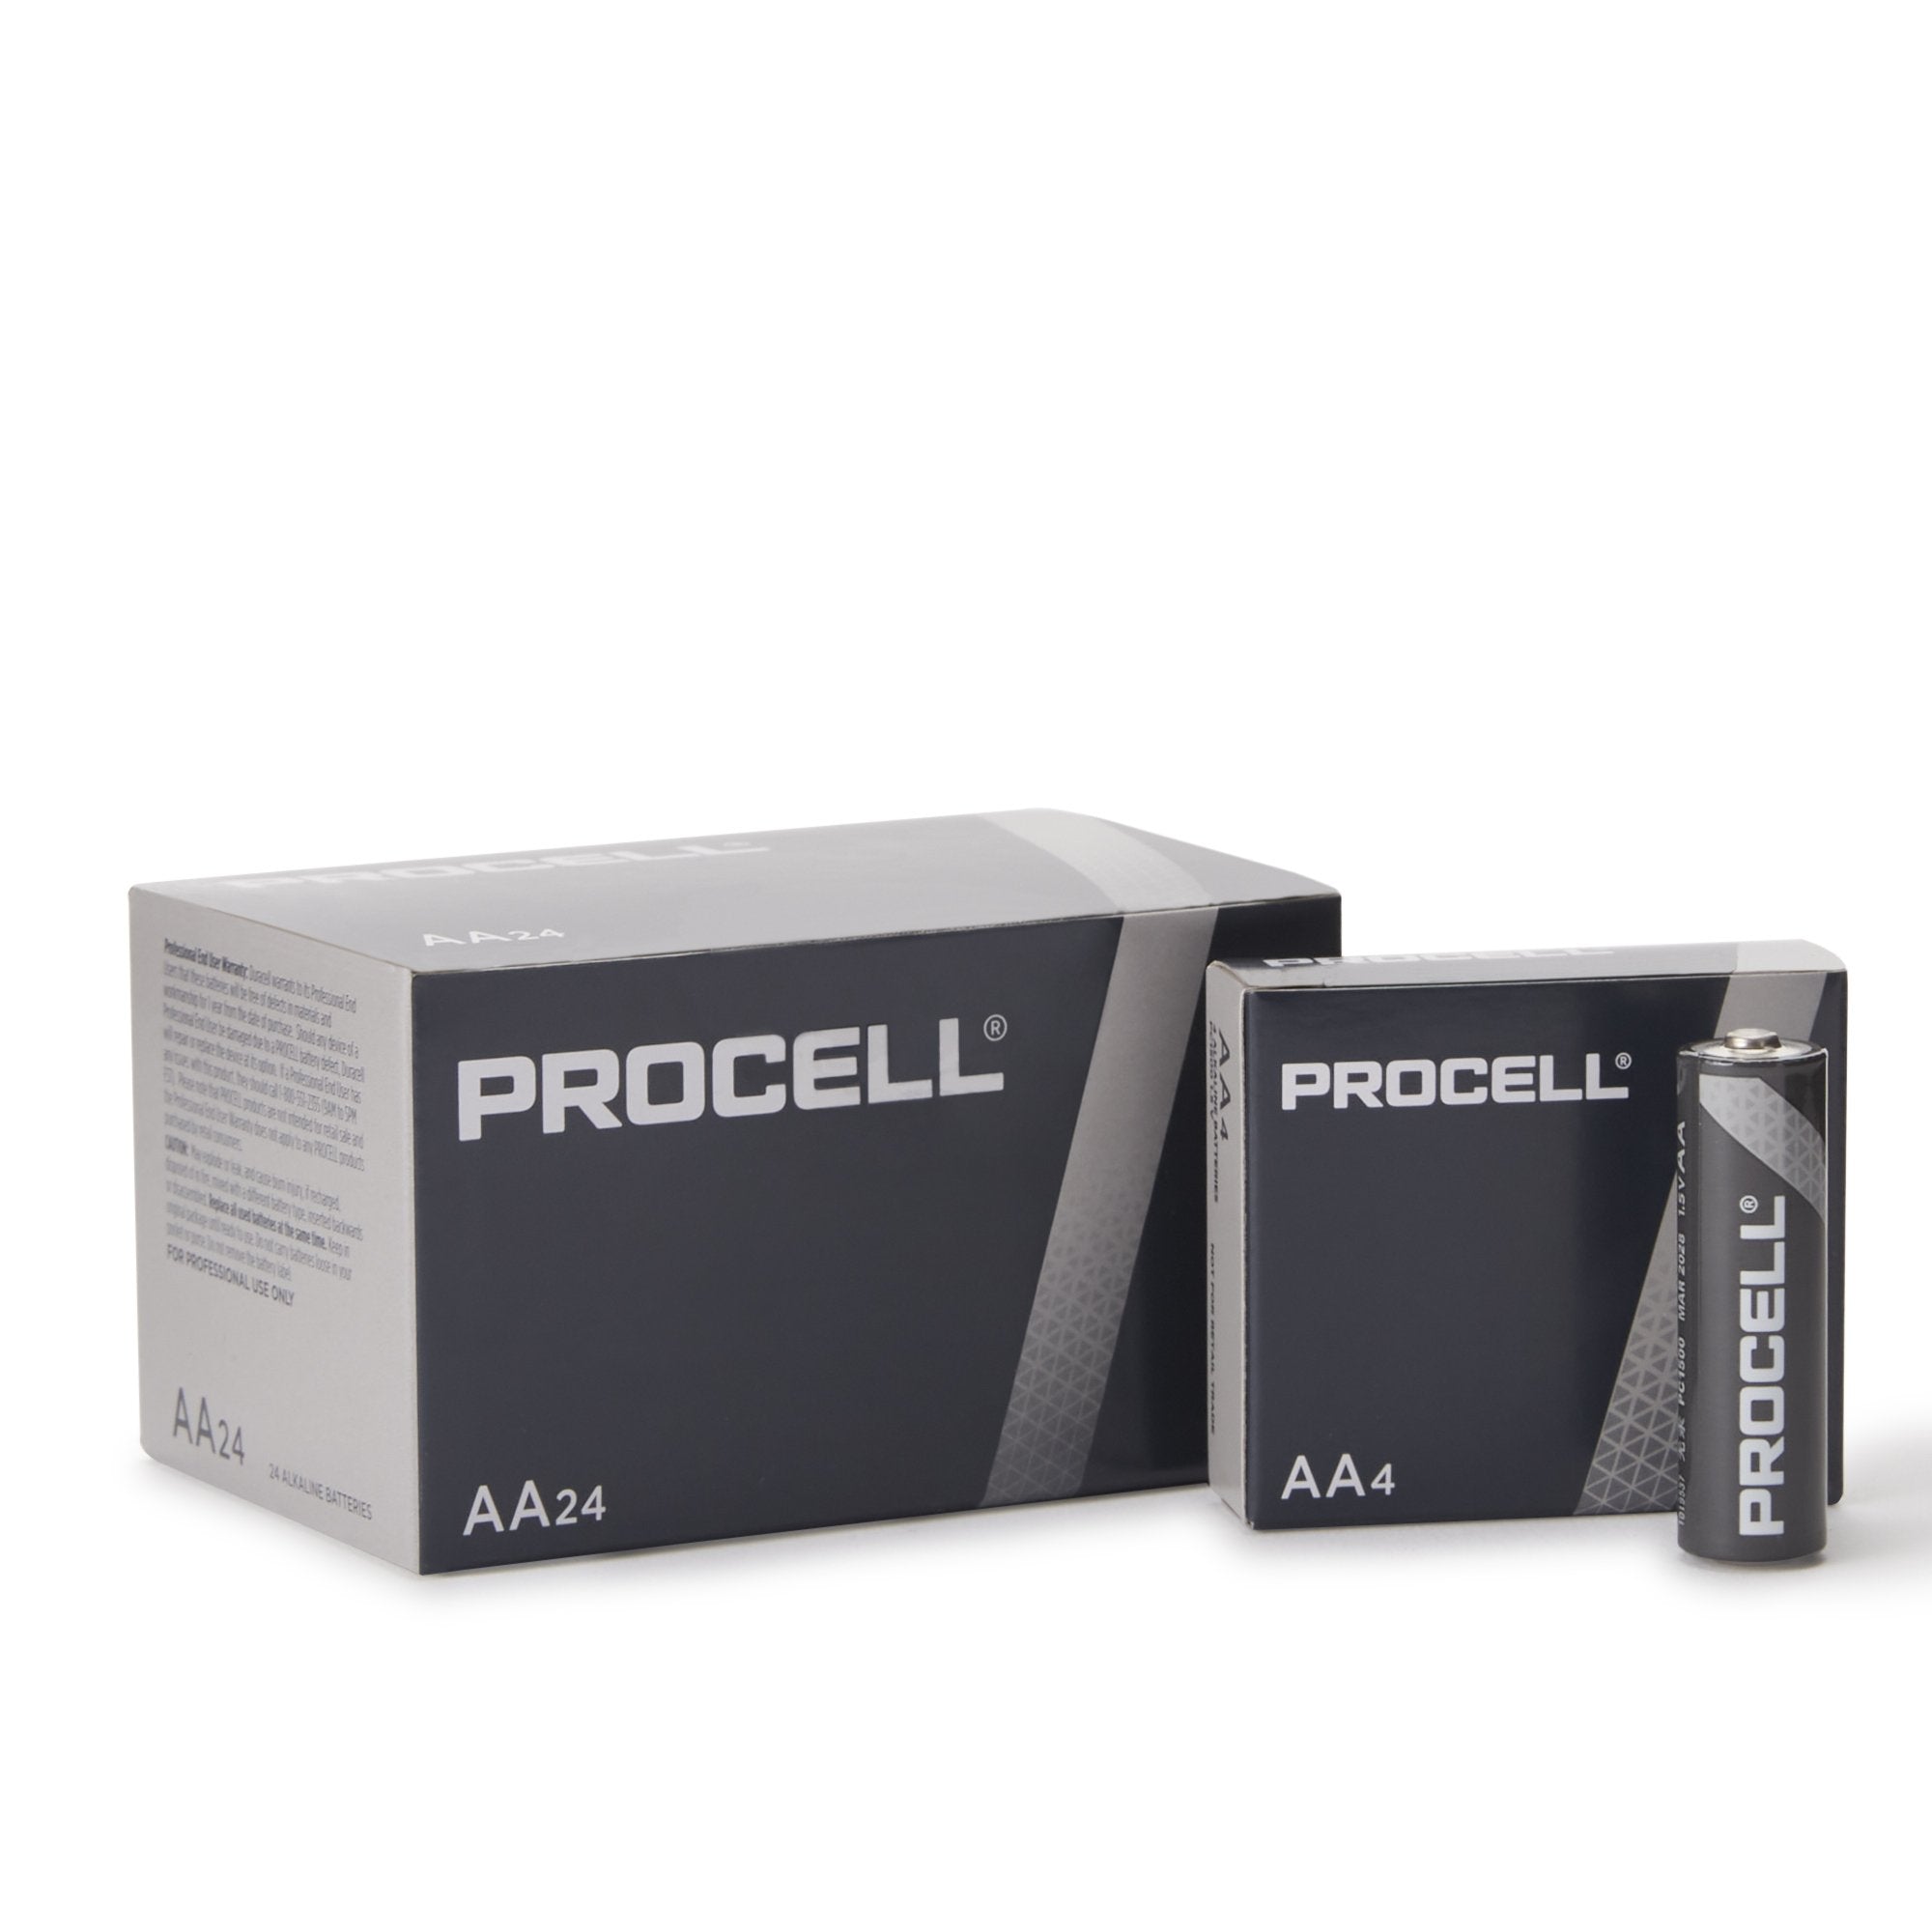 Duracell® Procell® AA Cell Disposable Alkaline Battery